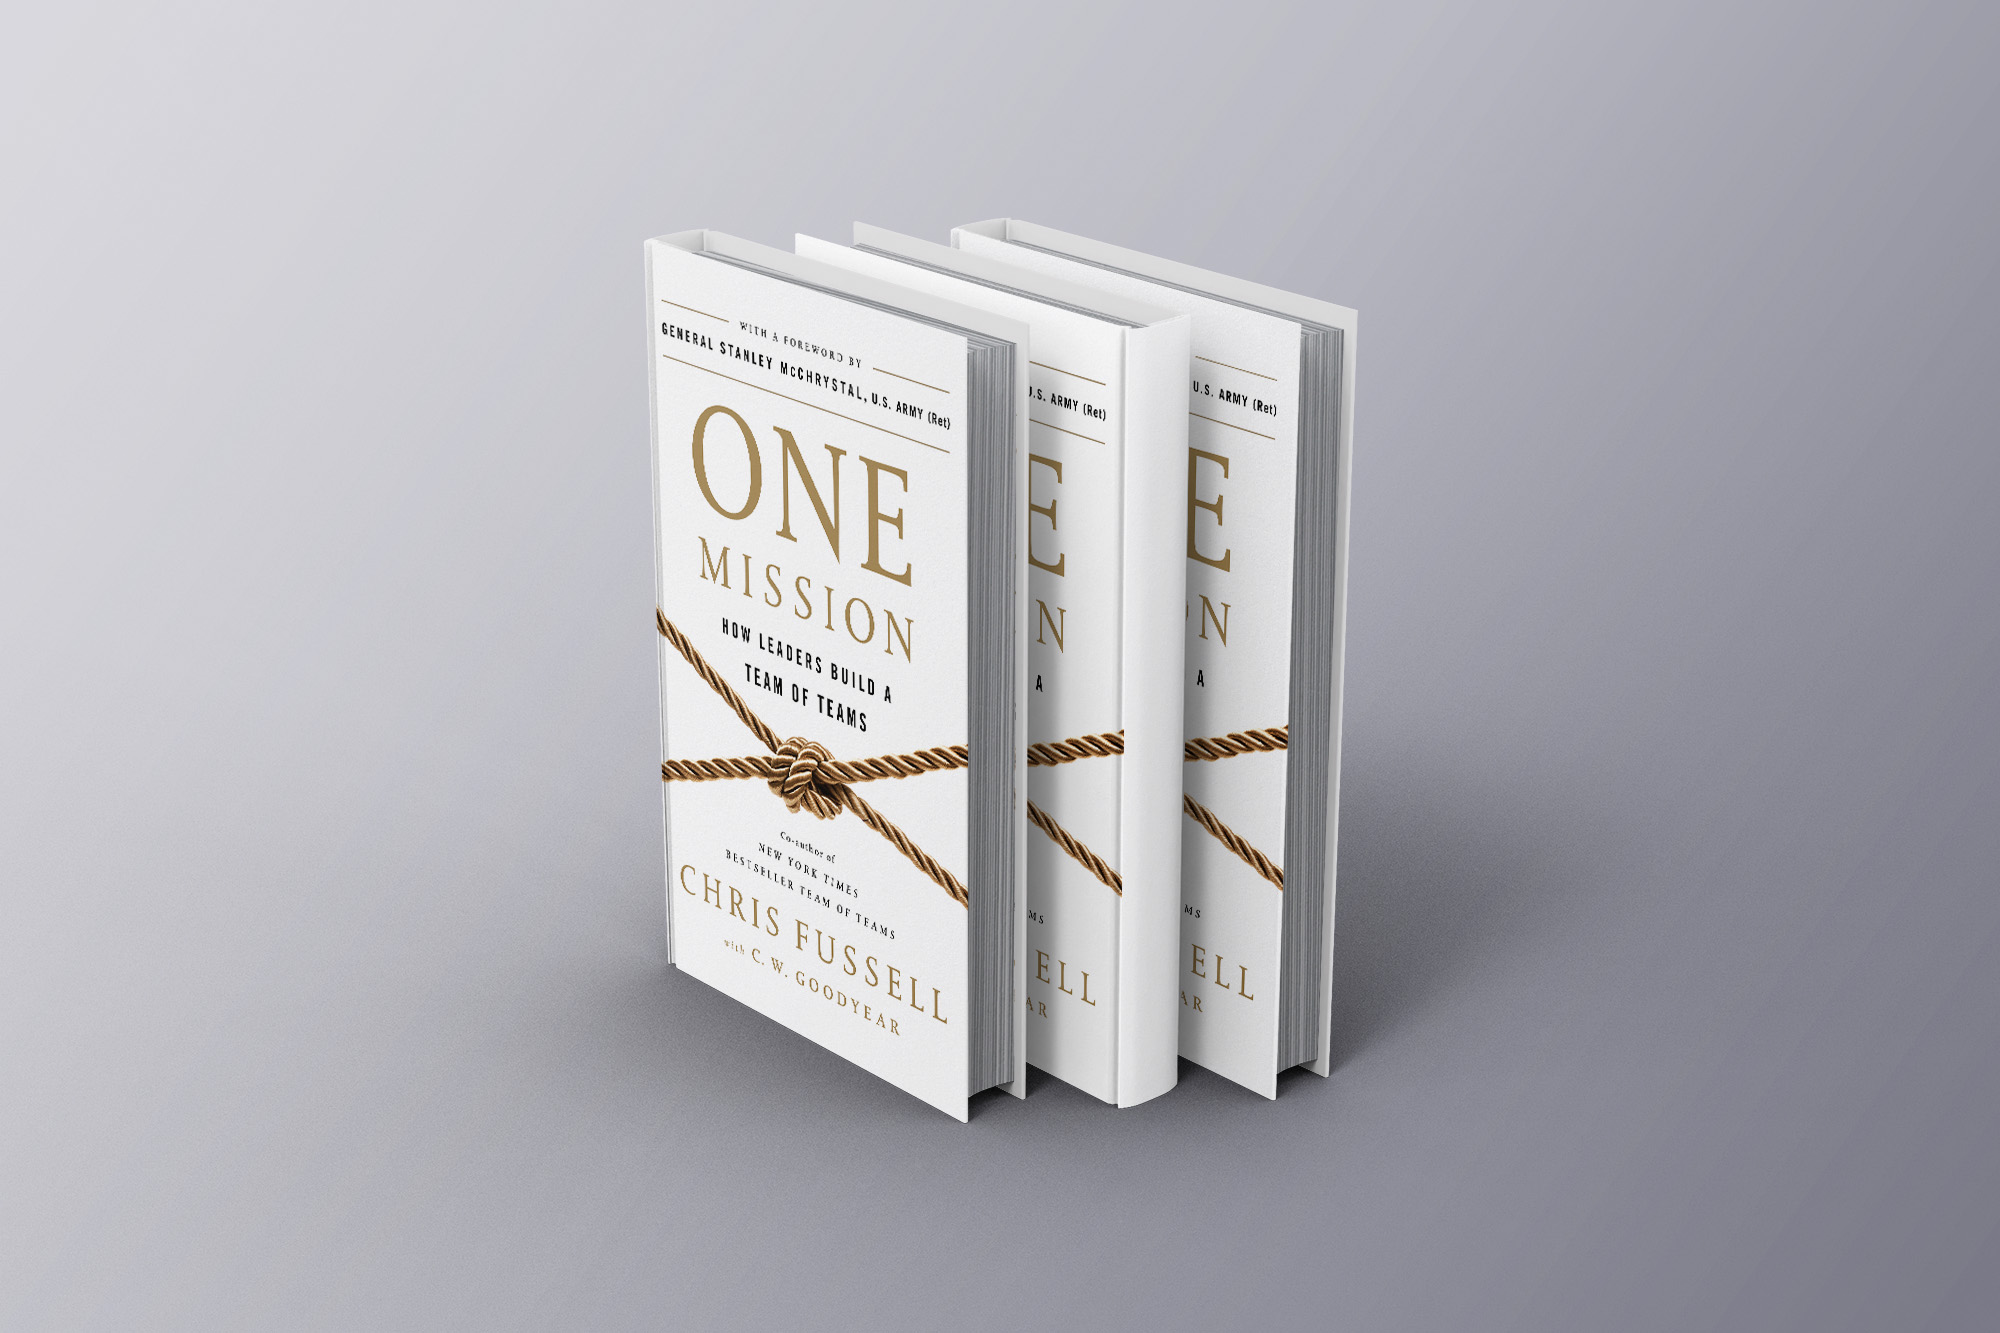 Chief of Staff Book Cover, "One Mission"